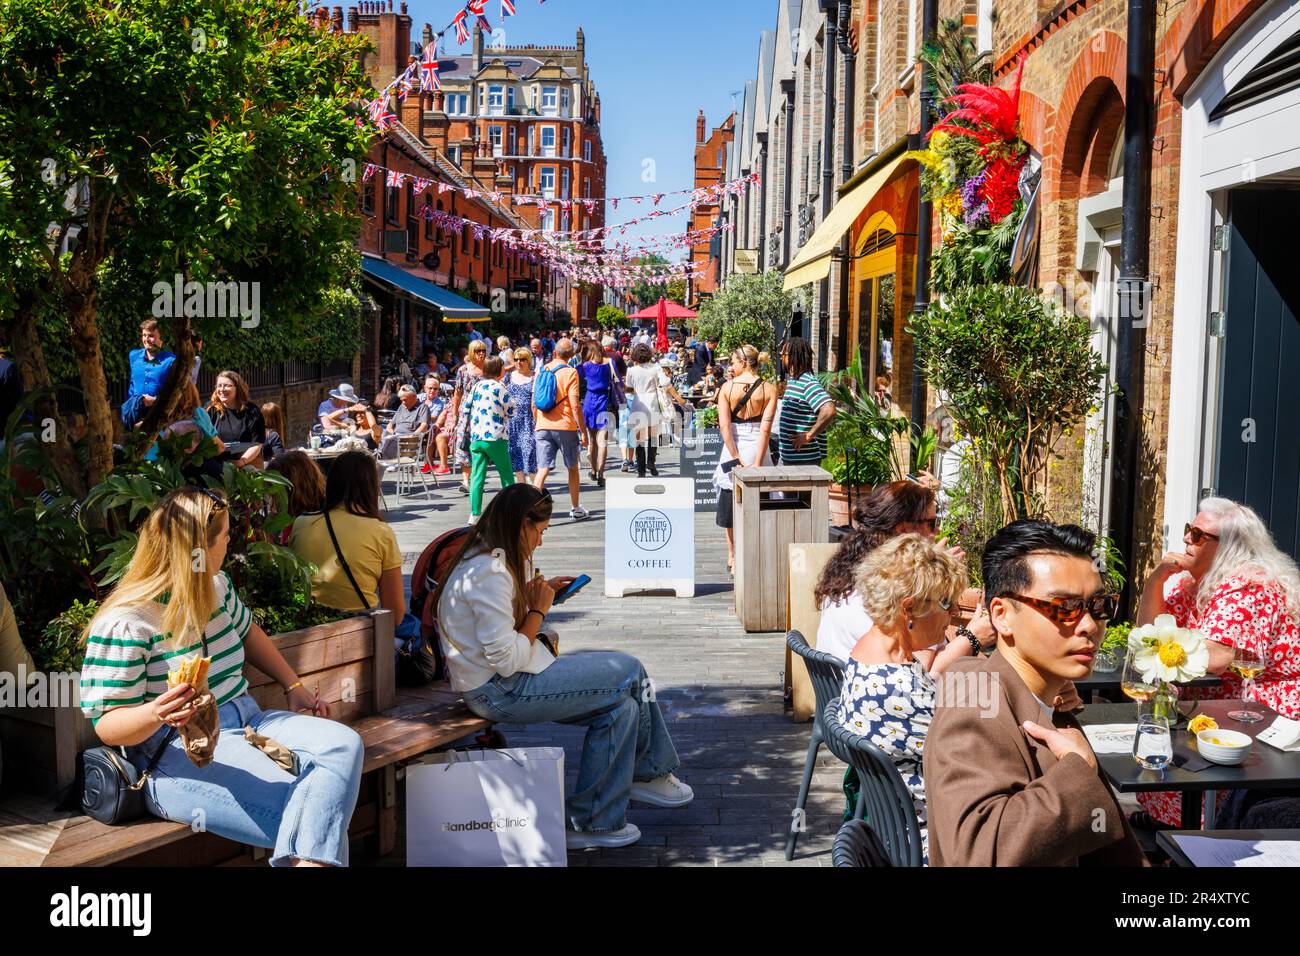 Vibrant roadside cafe culture and restaurants in Symons Street in the Sloane Square area of London SW3 on a sunny day during the Chelsea Flower Show Stock Photo